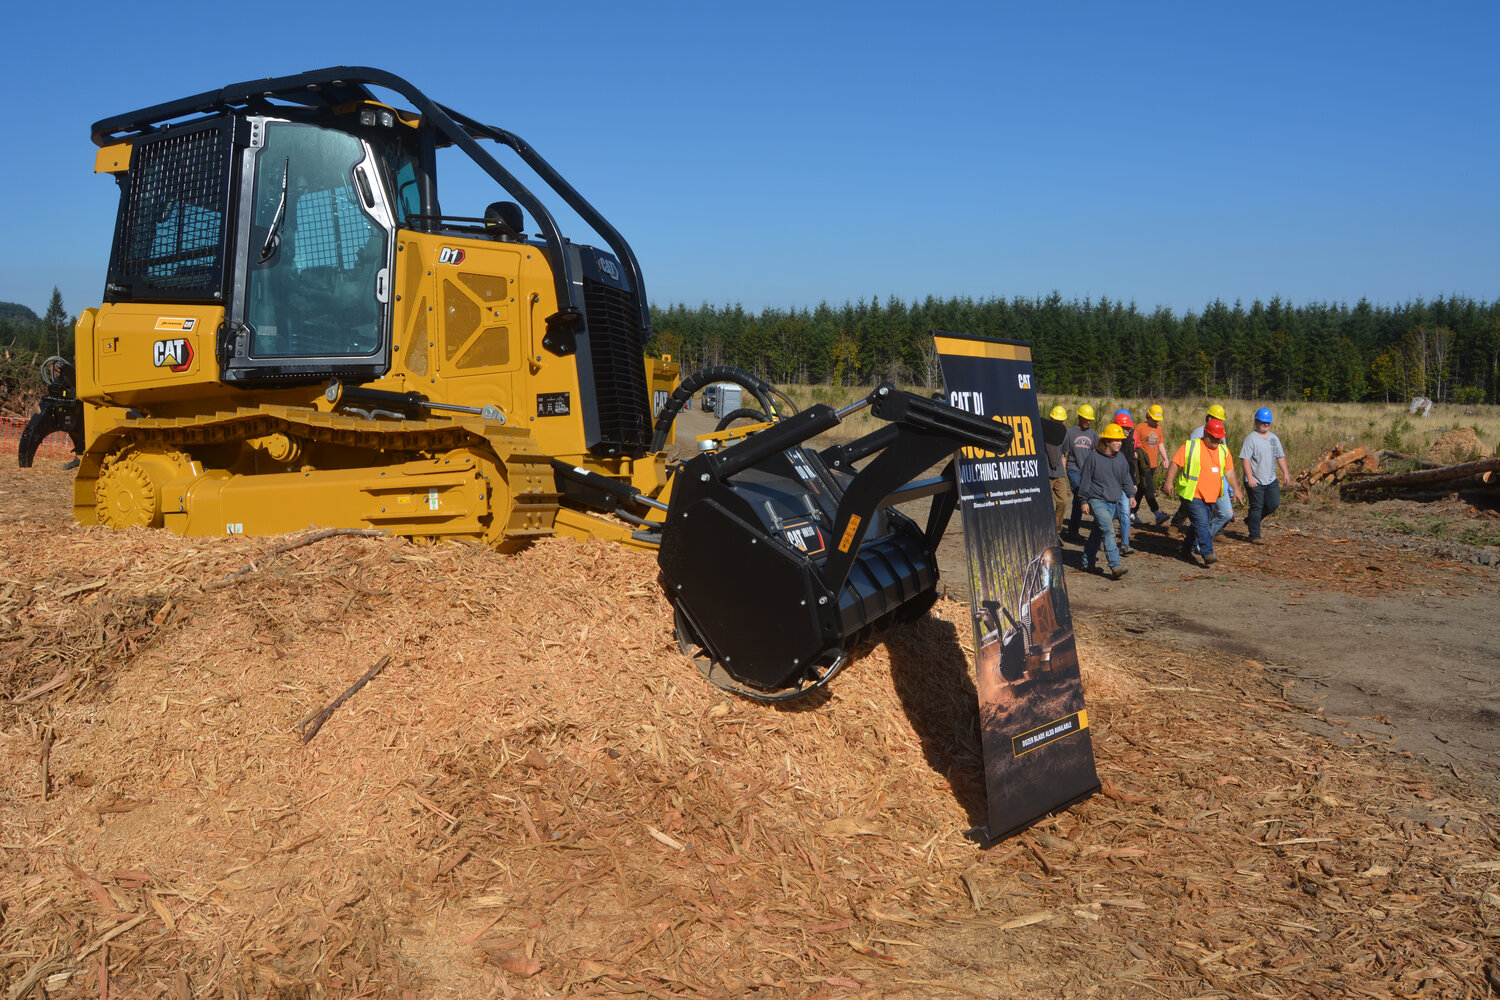 Students walk past a mulcher on display at the Pacific Logging Congress Live In-Woods Show on Sept. 22.